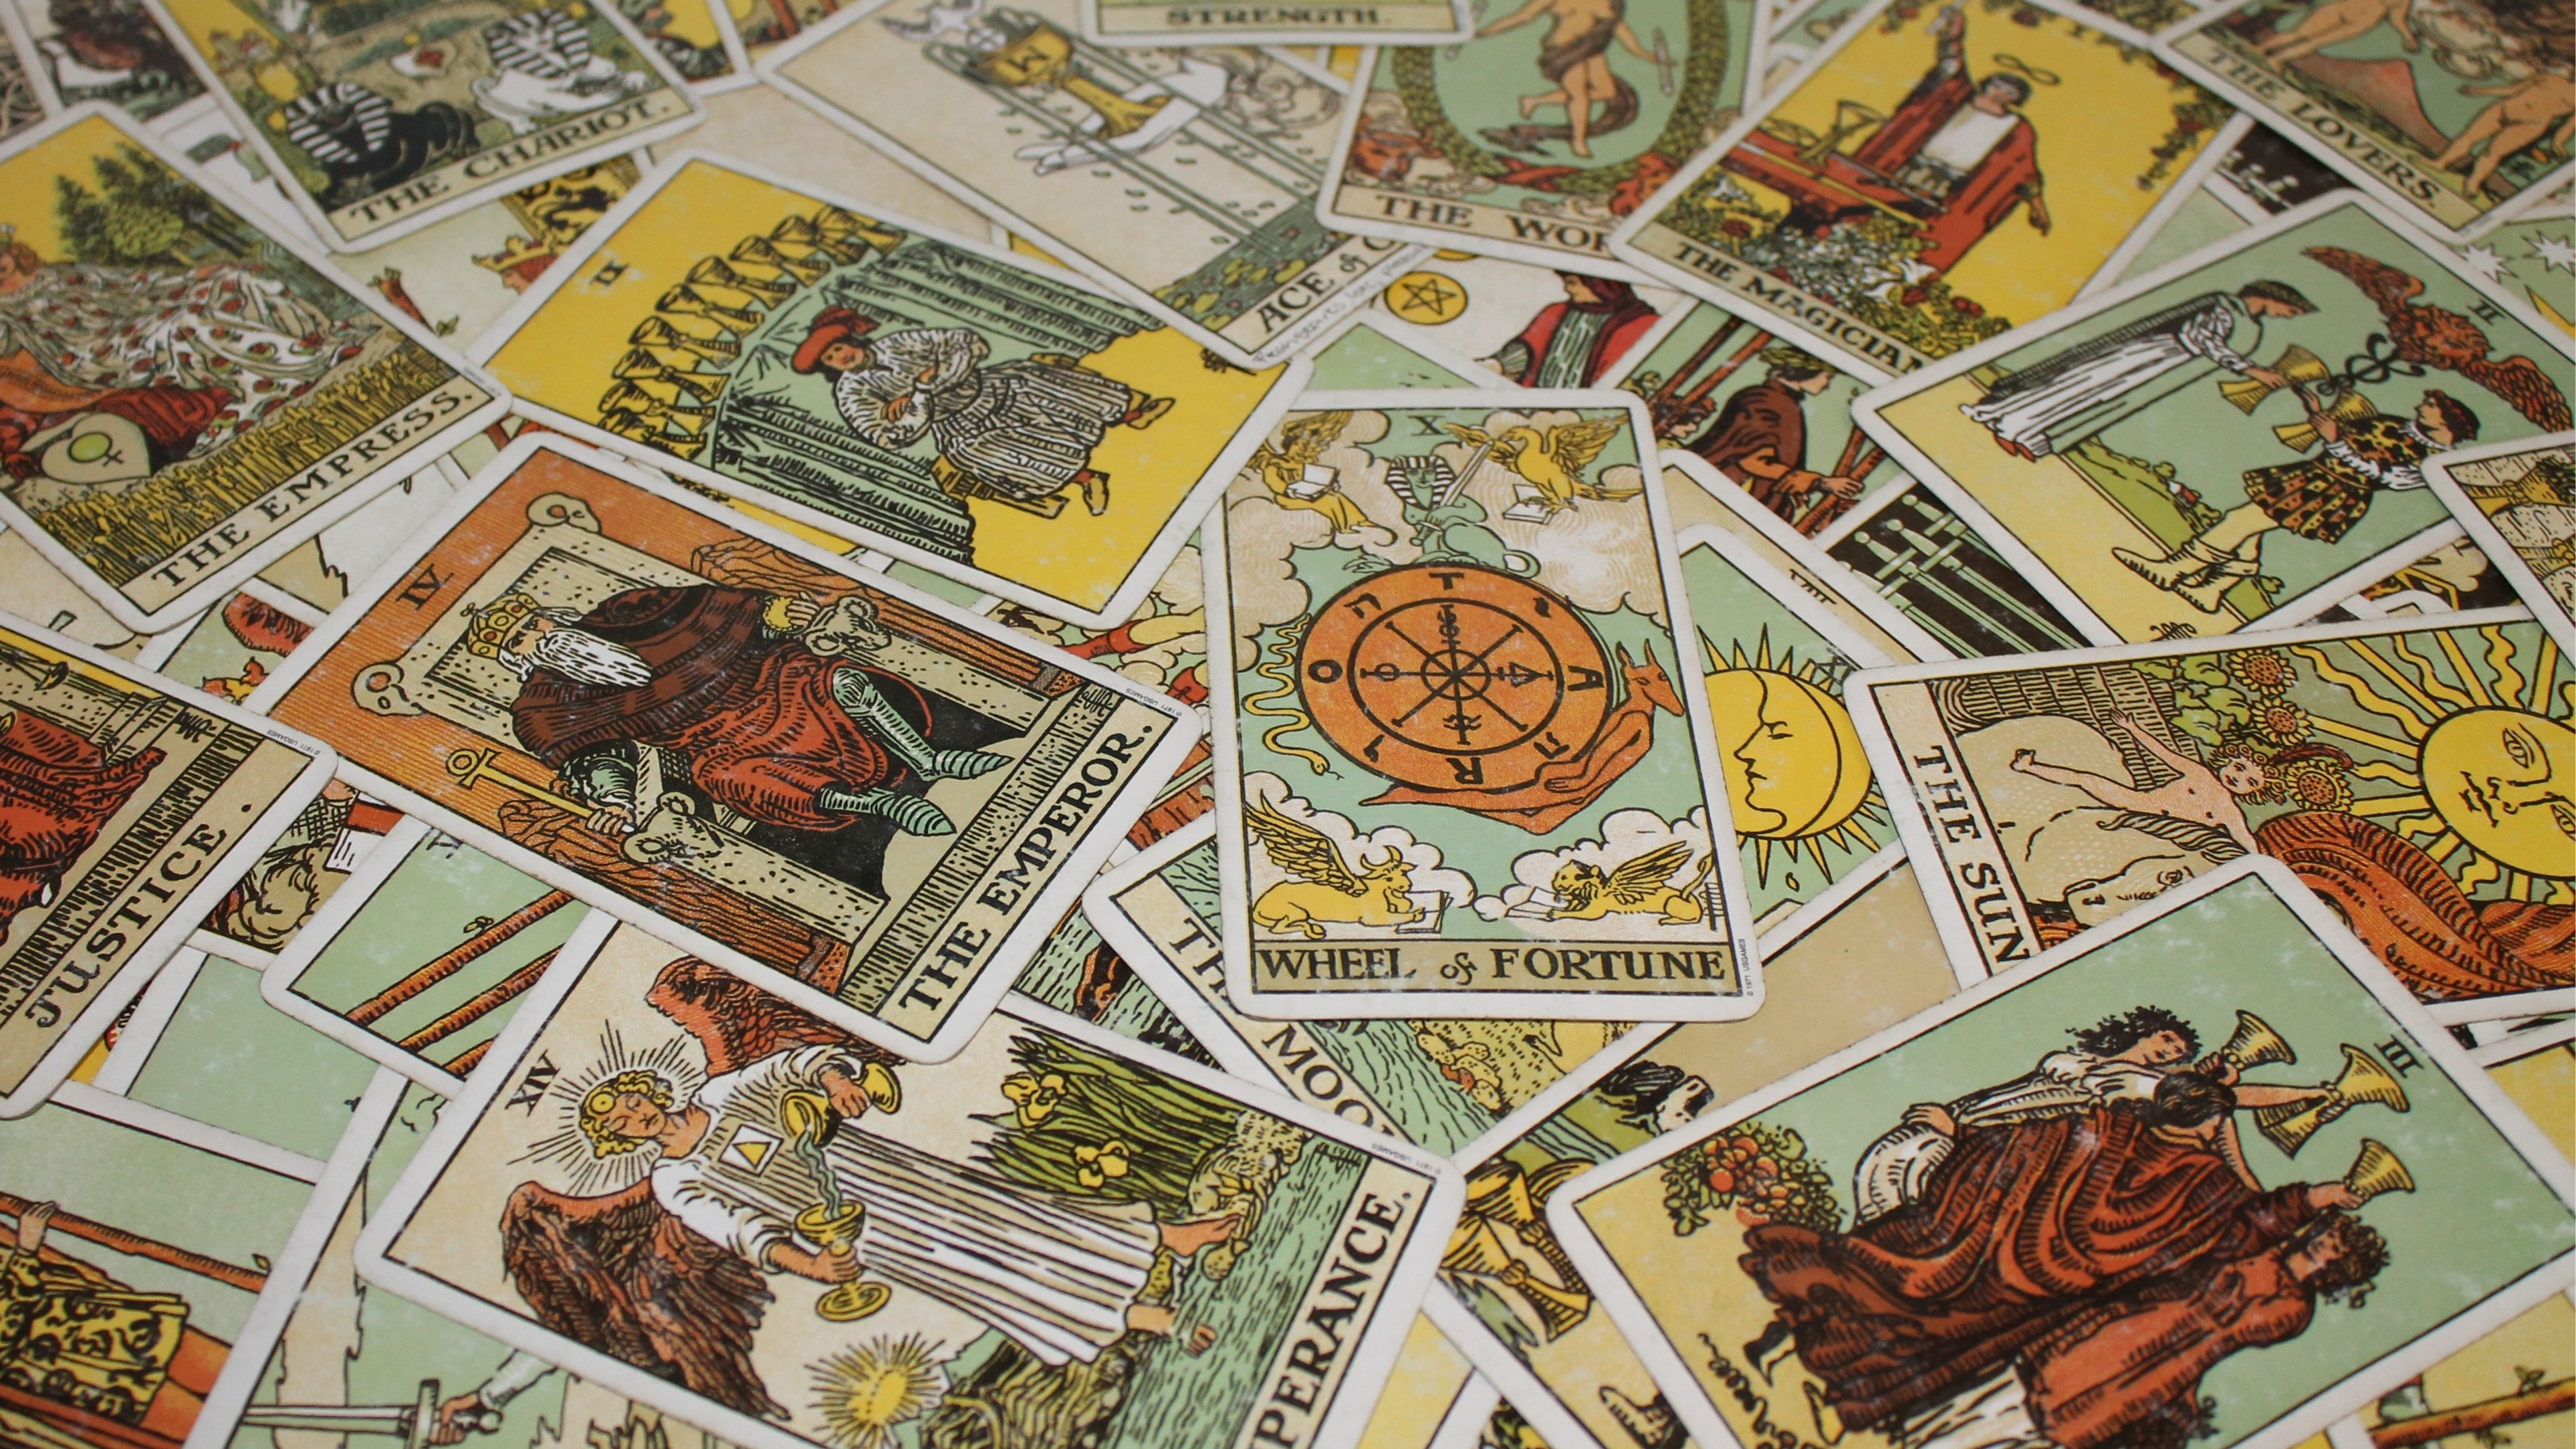 
Tarot 101: Divining Wisdom throughout the Ages